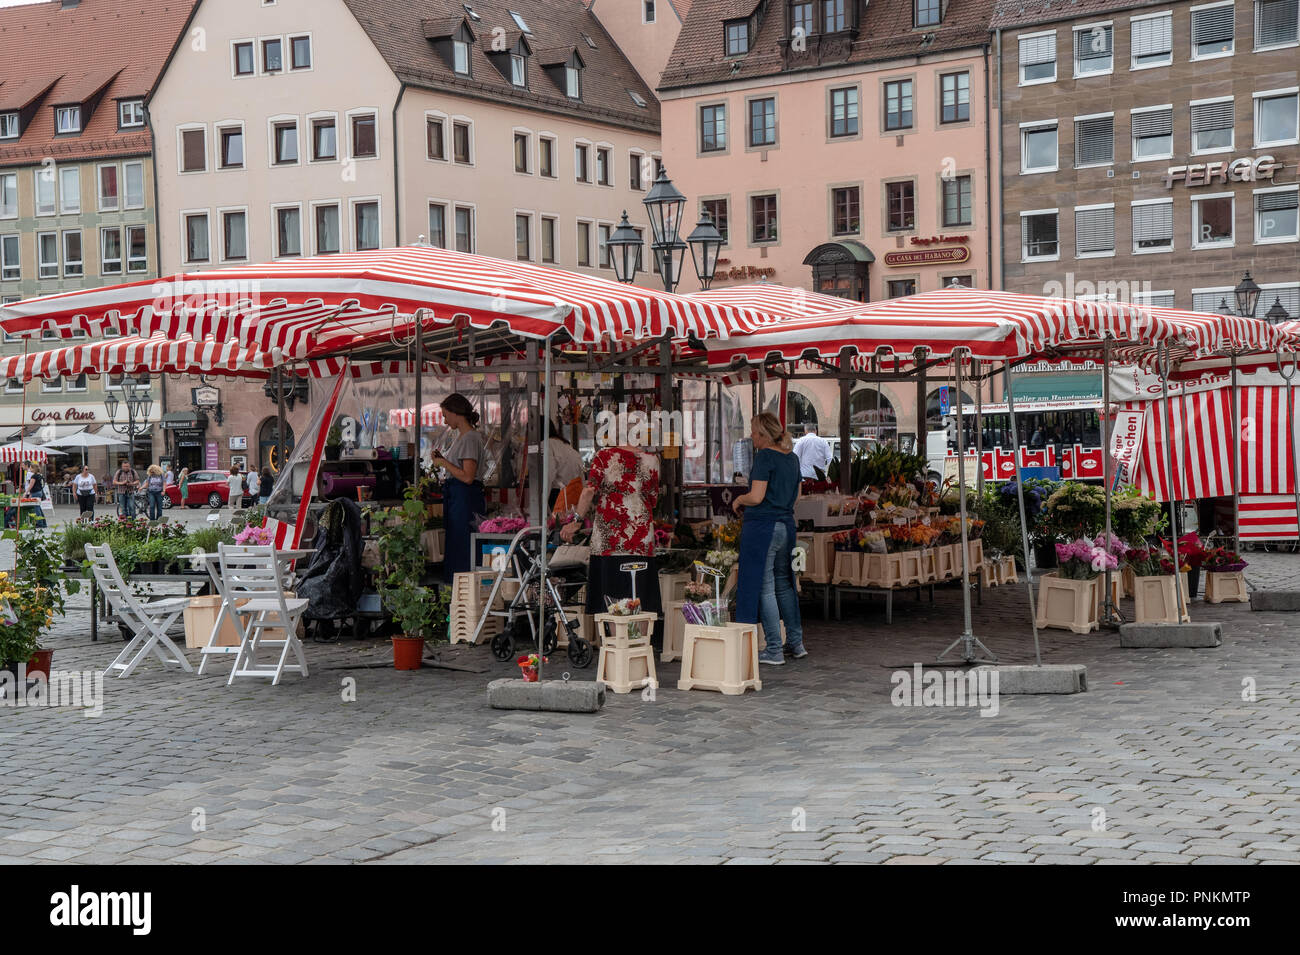 Vendors sell produce and gifts in Nuremberg Market Square Stock Photo